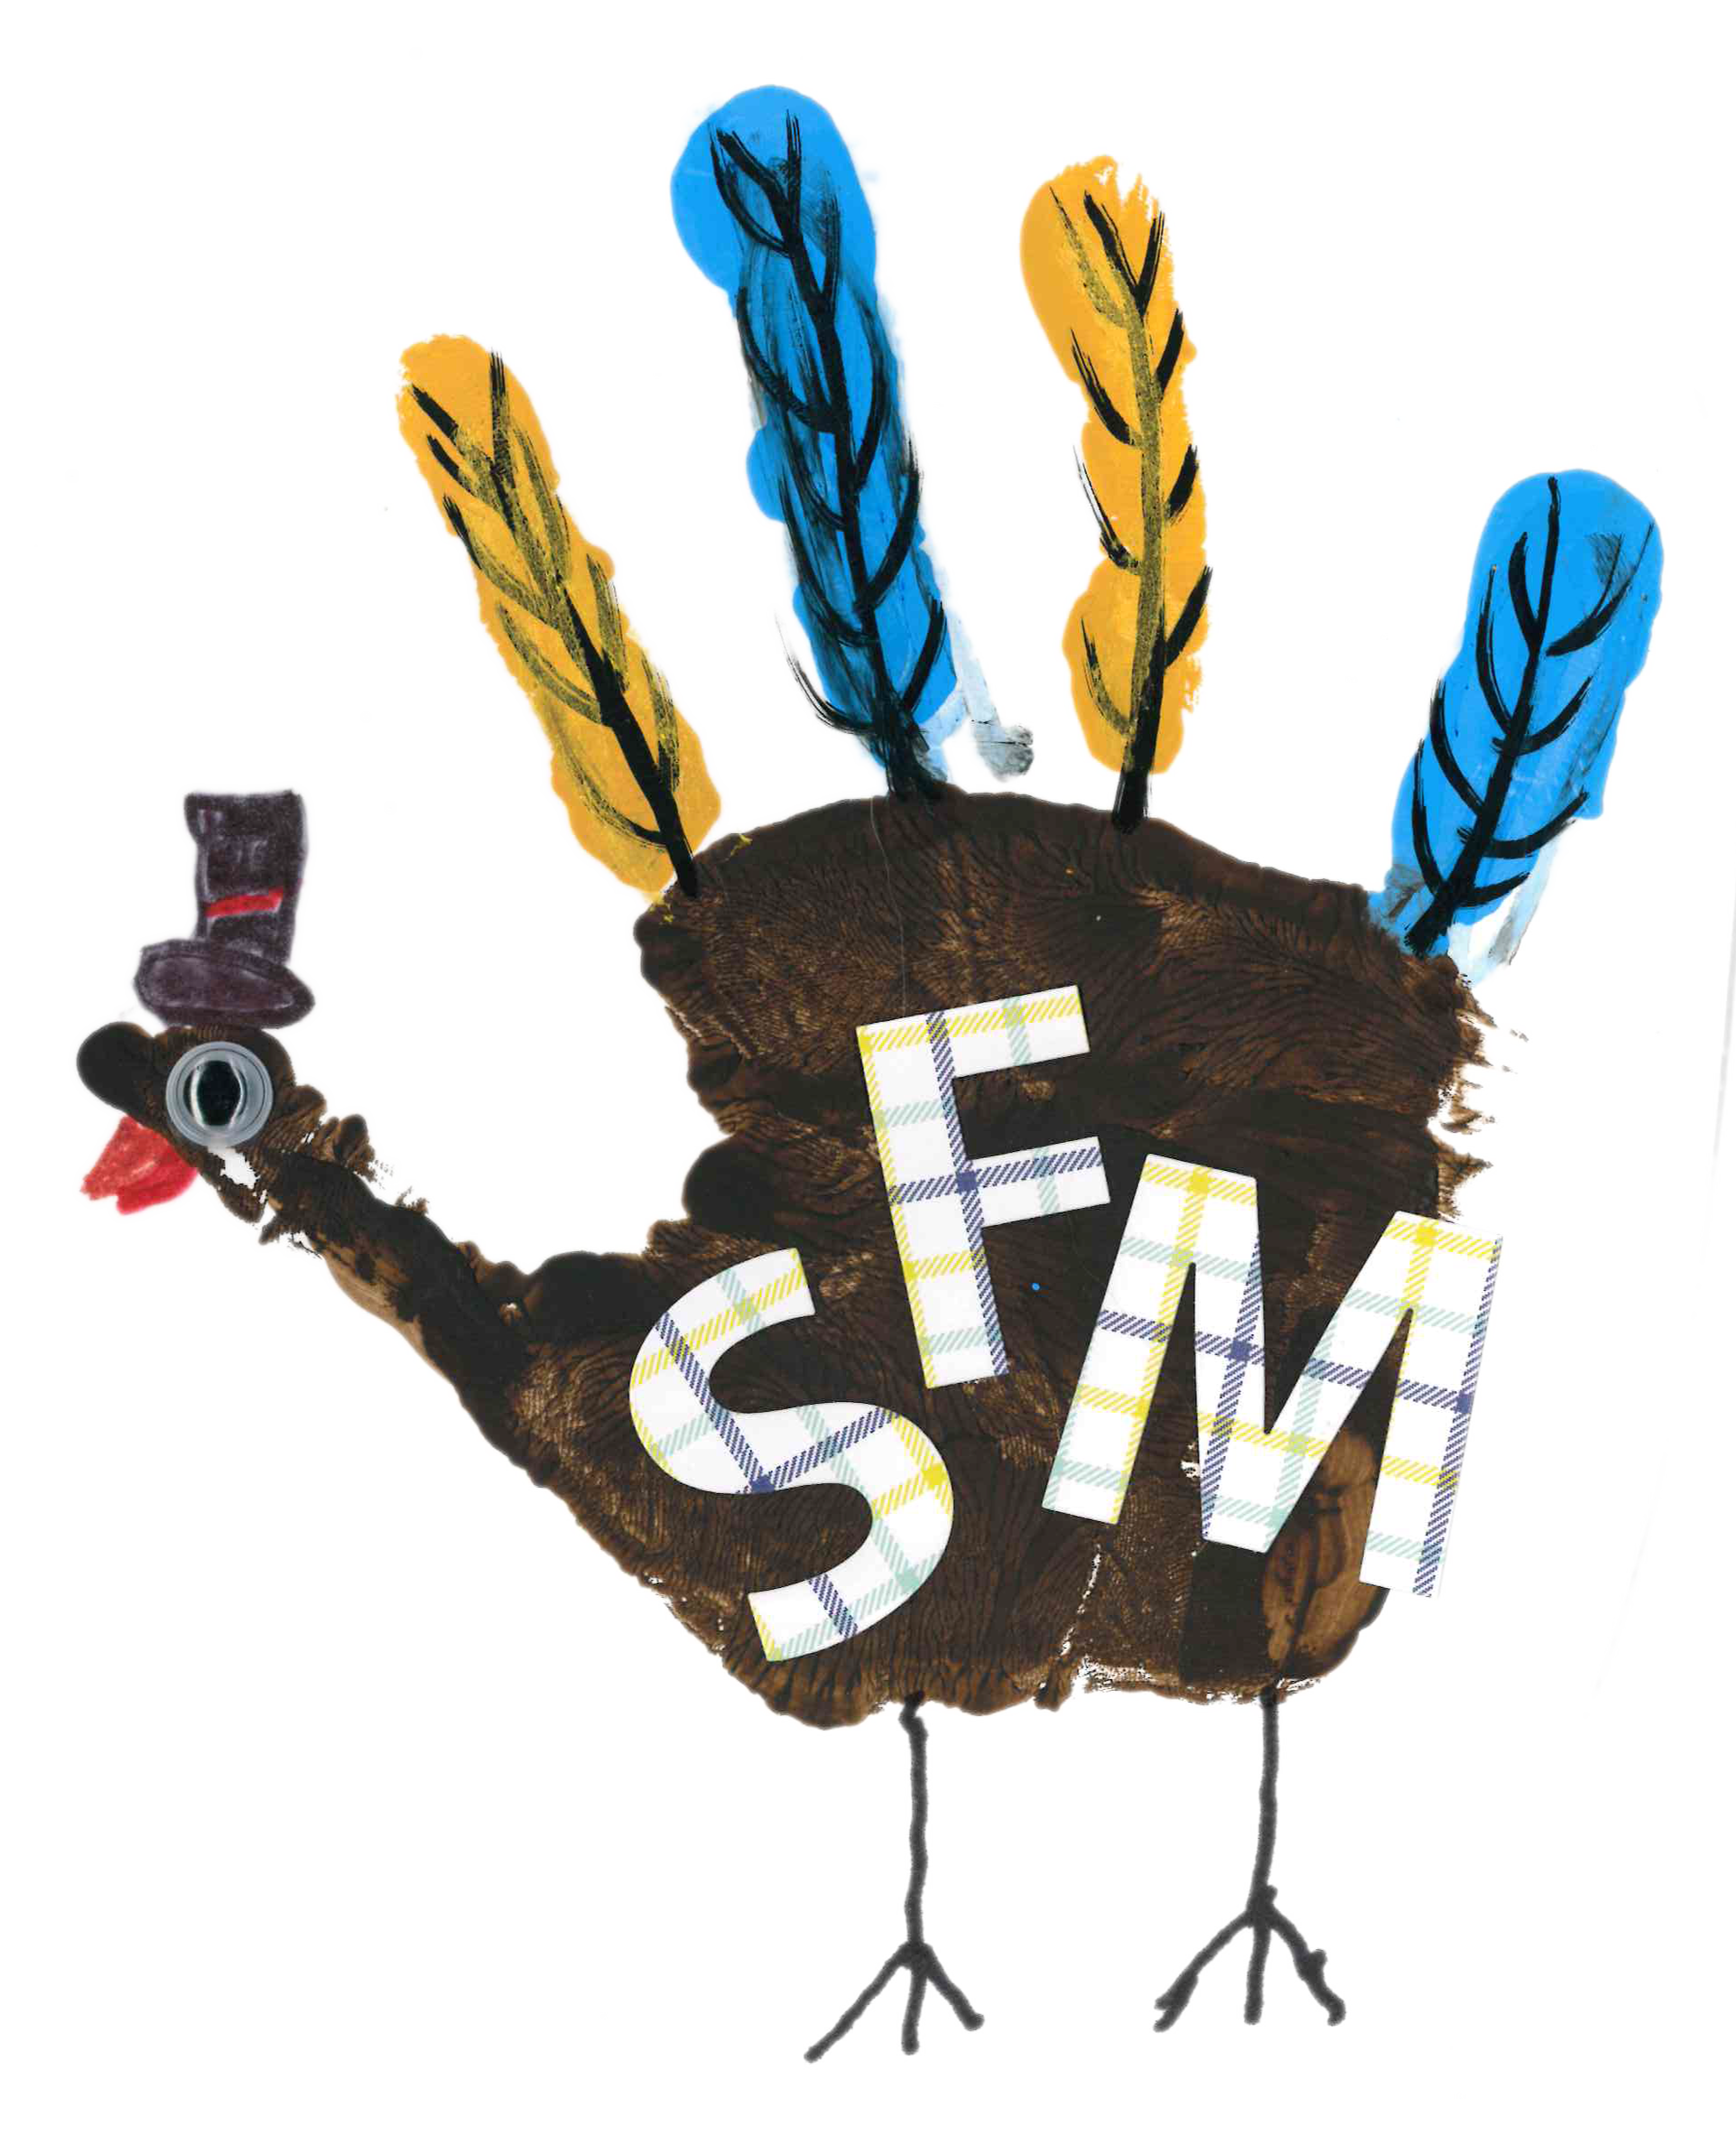 A hand-drawn turkey with the letters "SFM" on its body. The turkey has feathers colored blue and yellow. The face is on the thumb, which has a brown top hat and a red wattle. The overall body is brown with stick-like legs.